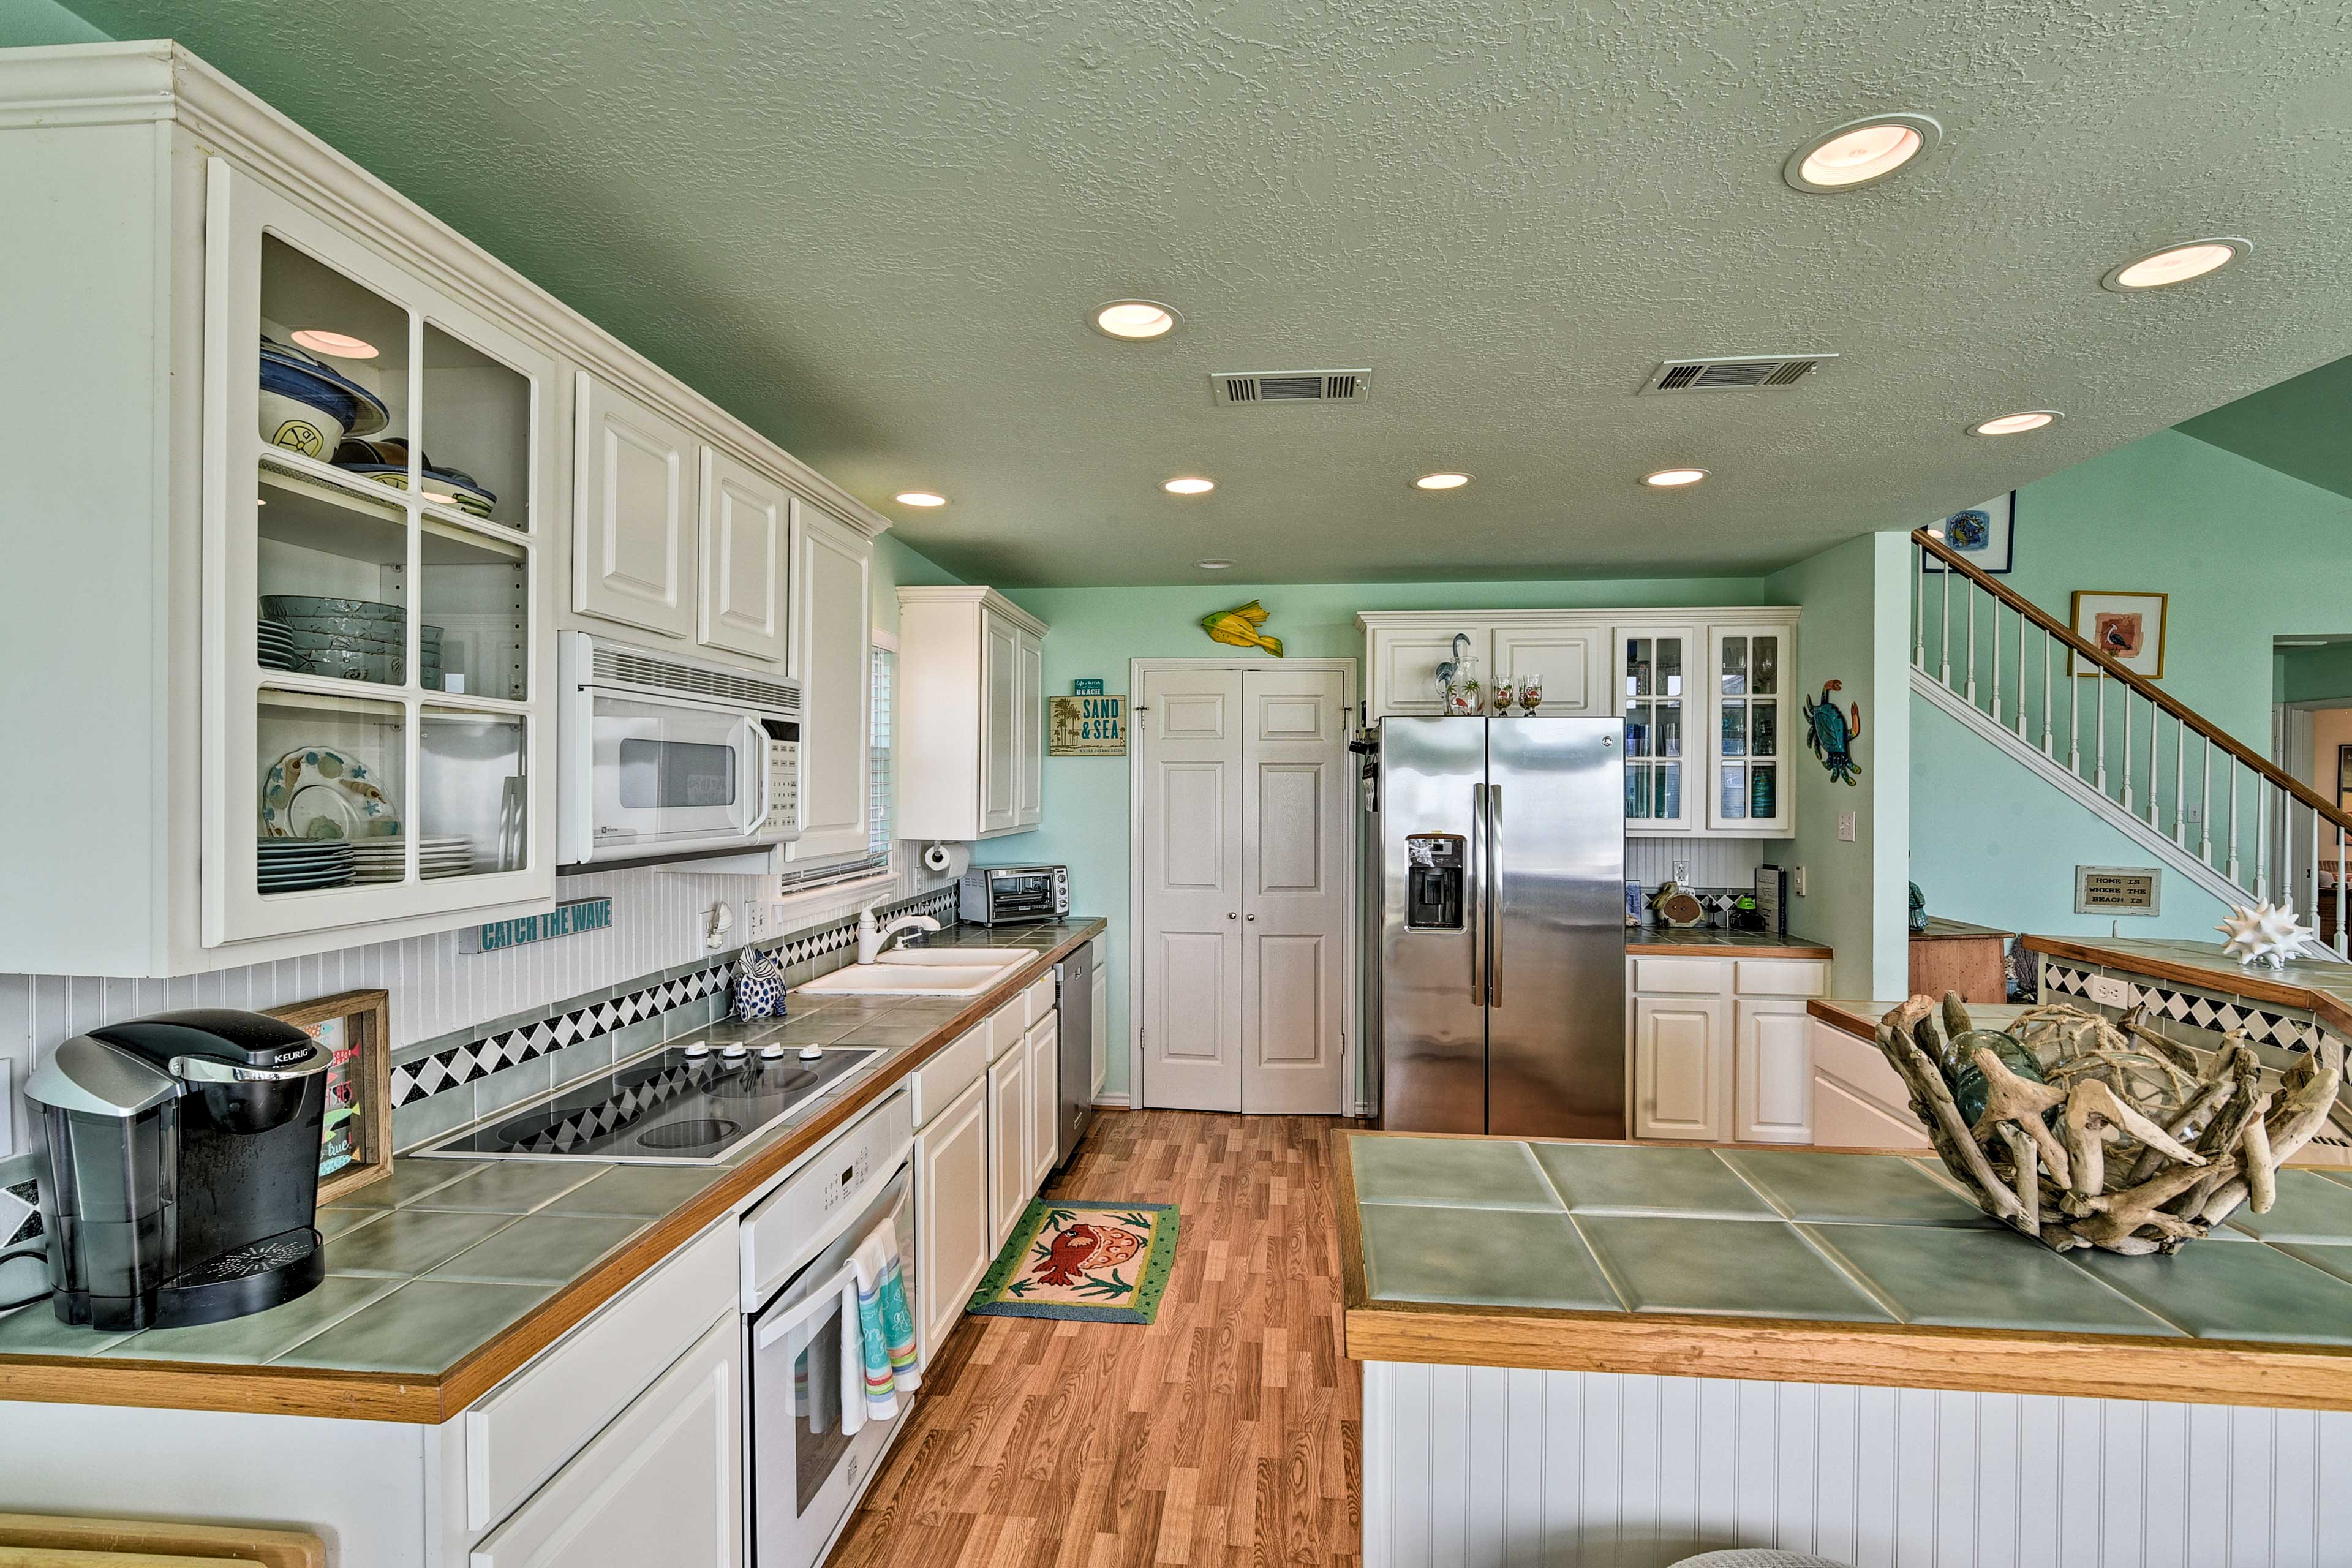 This kitchen features all of the bells and whistles, including a Keurig!